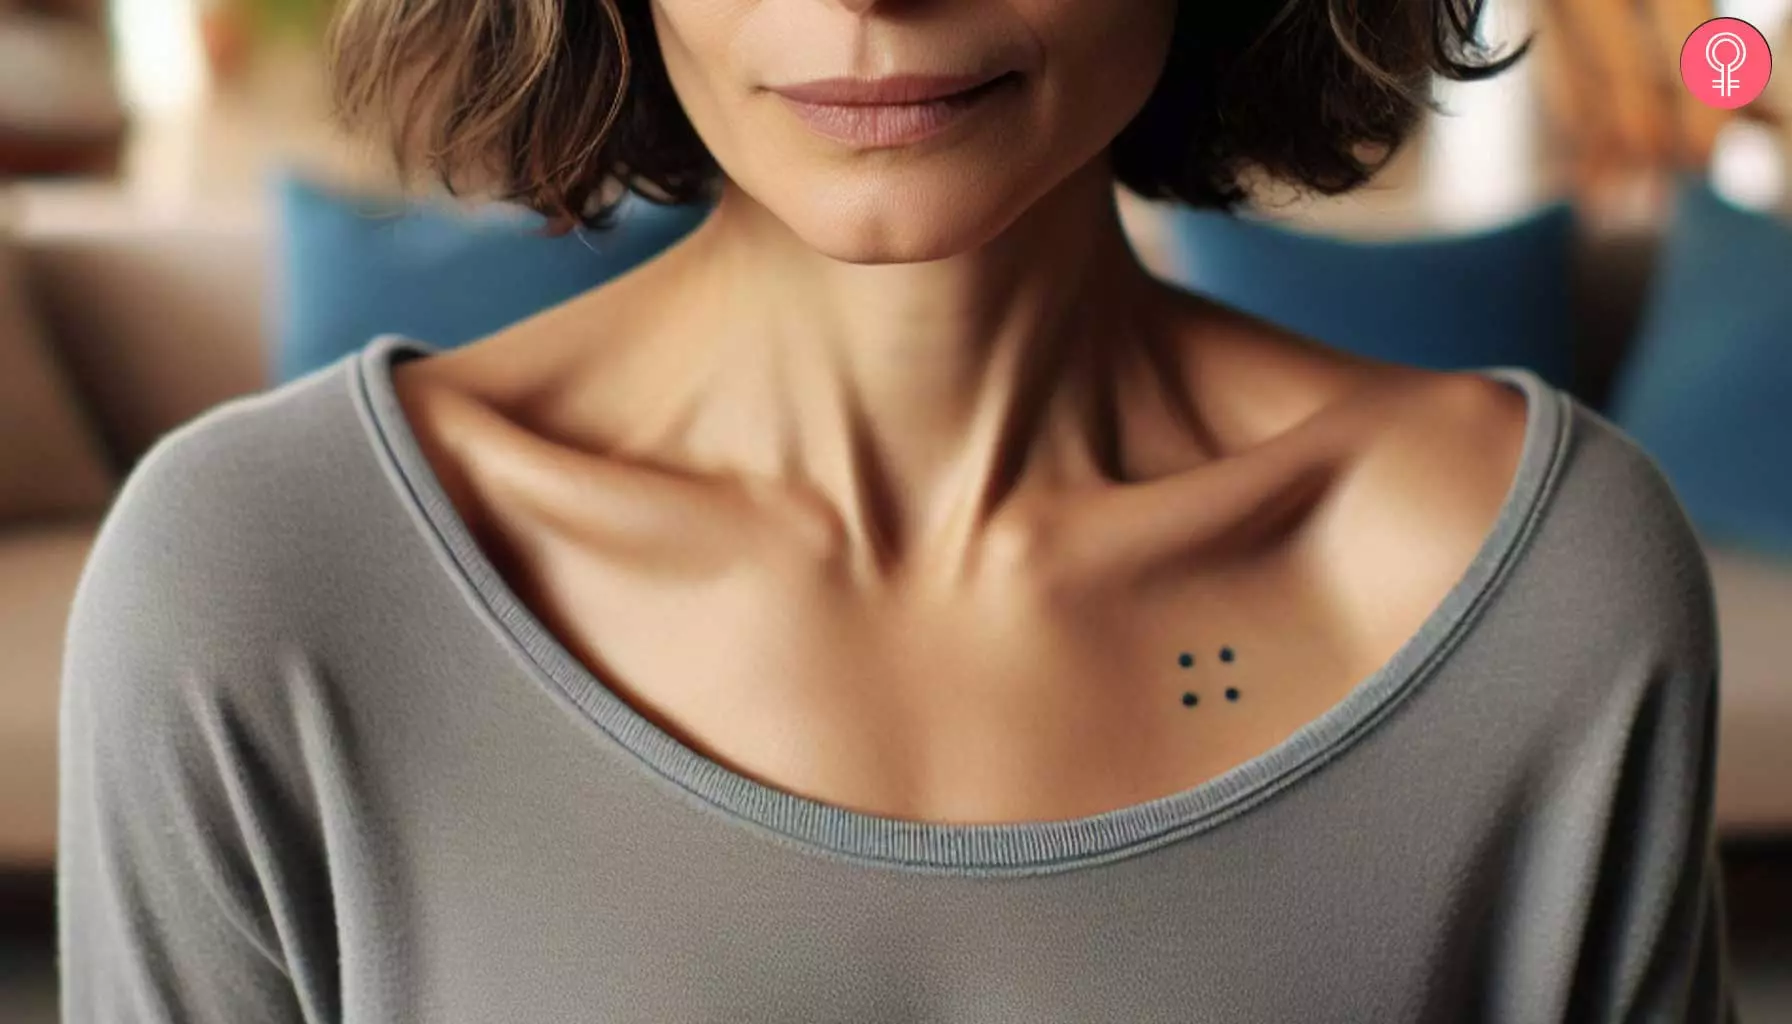 A Mayan numbers tattoo under a woman’s collarbone